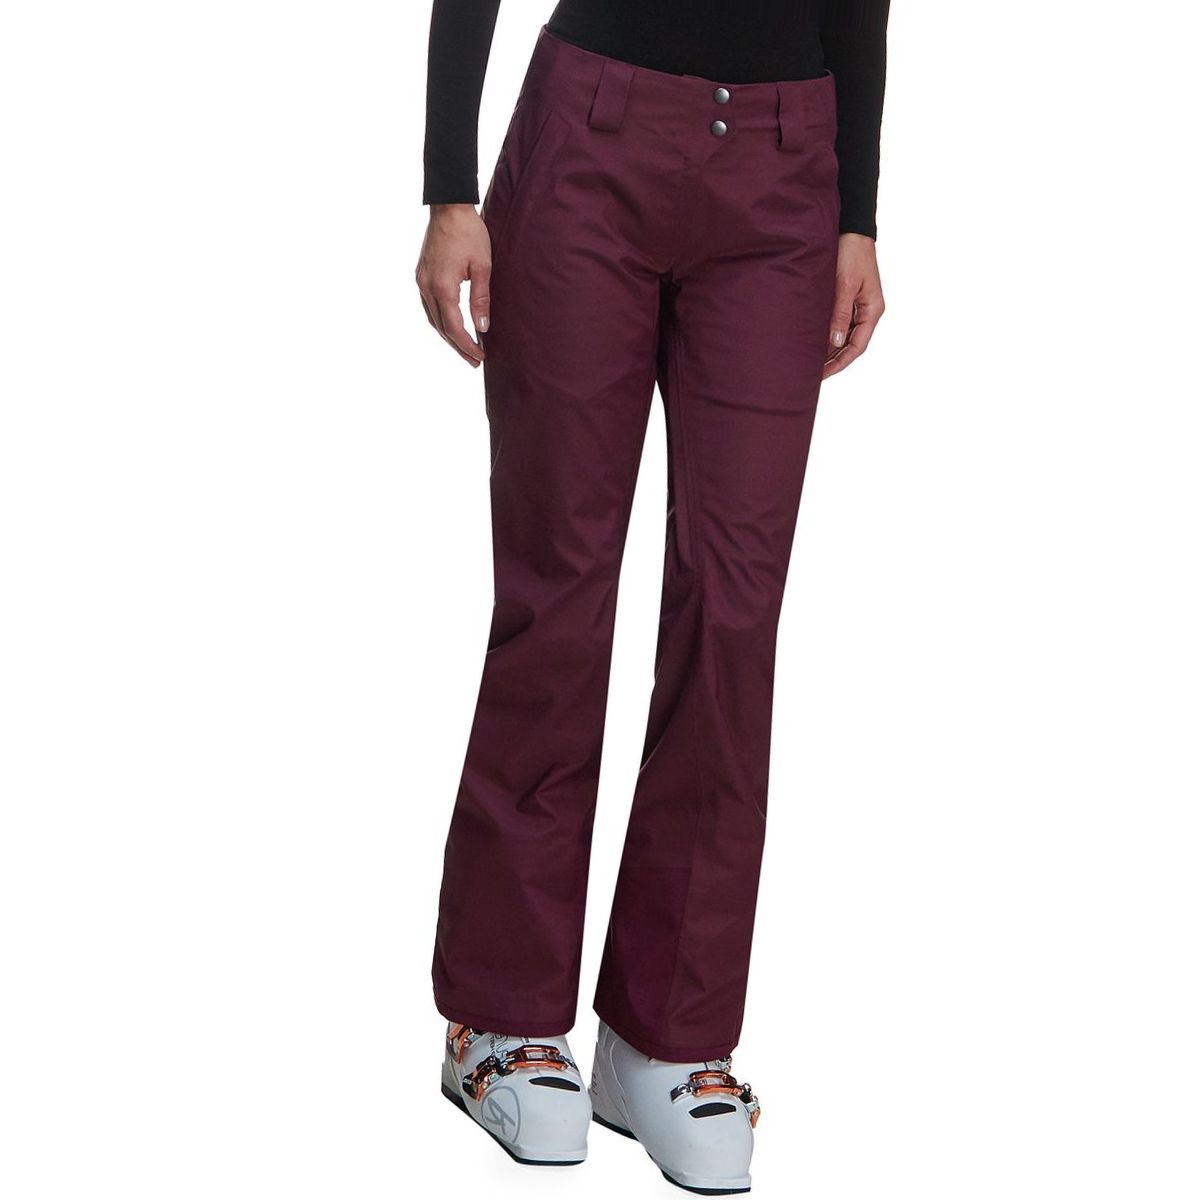 Patagonia Snowbelle Stretch Pant - Women's